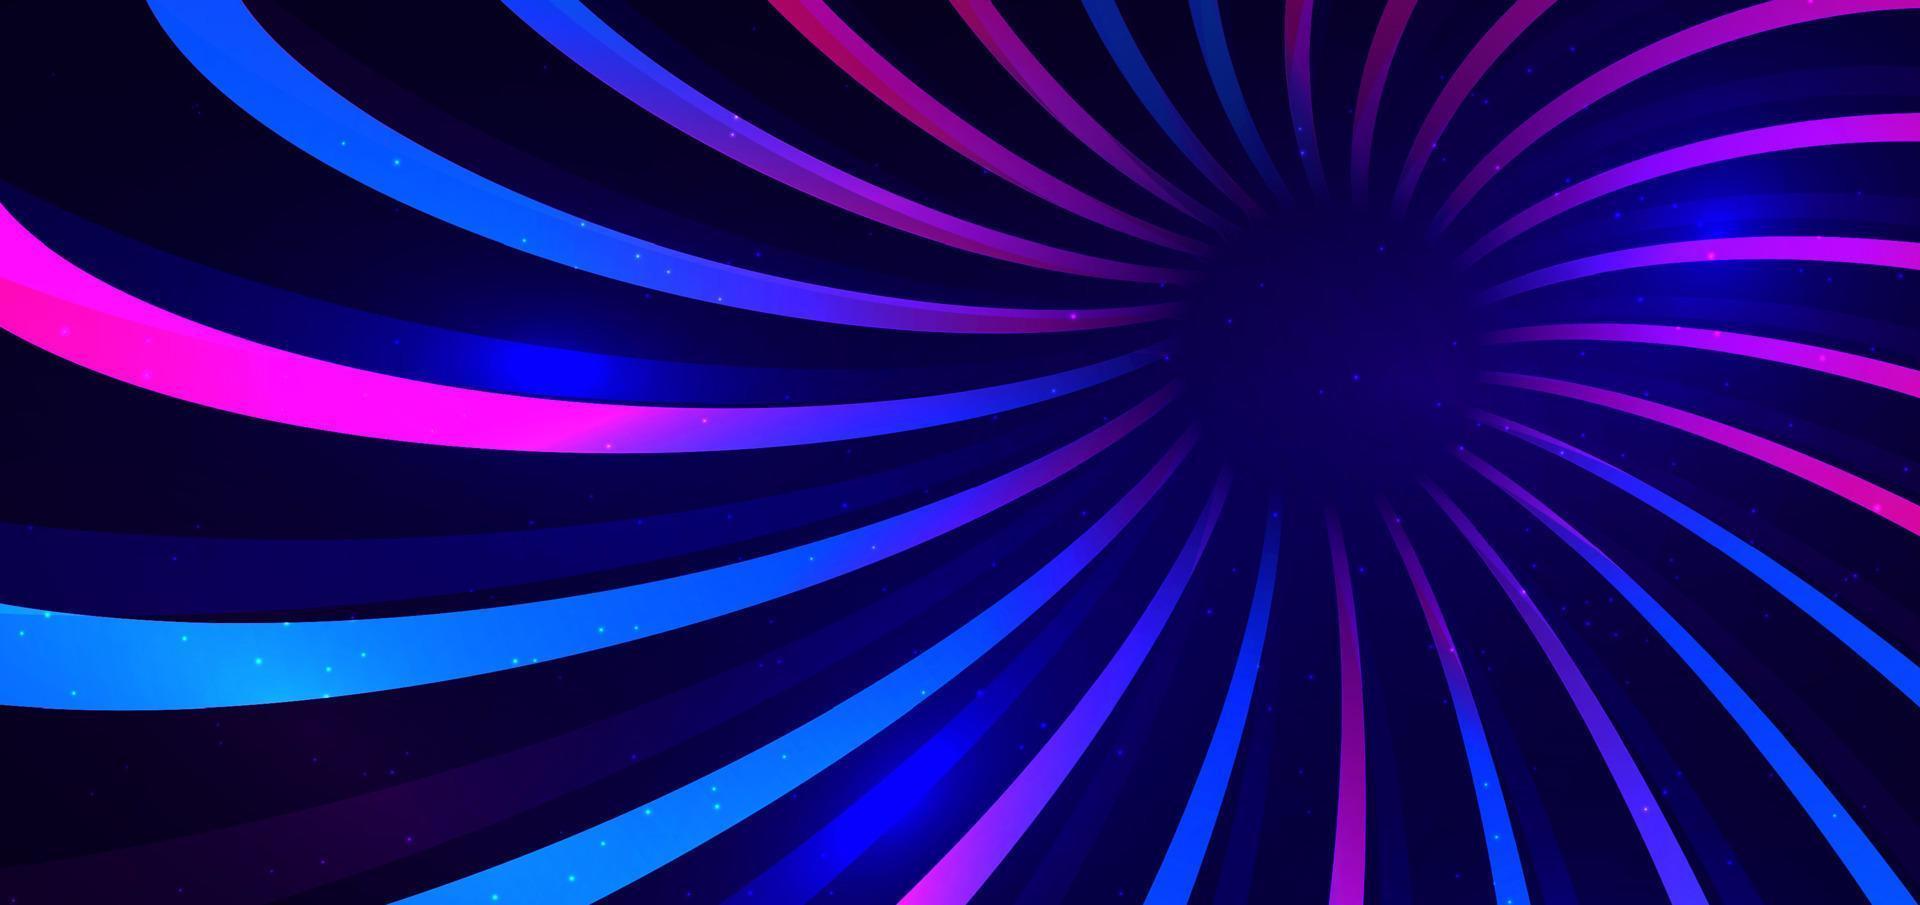 Abstract technology futuristic neon curved glowing blue and pink light lines with tunnel future speed motion effect on dark blue background. vector